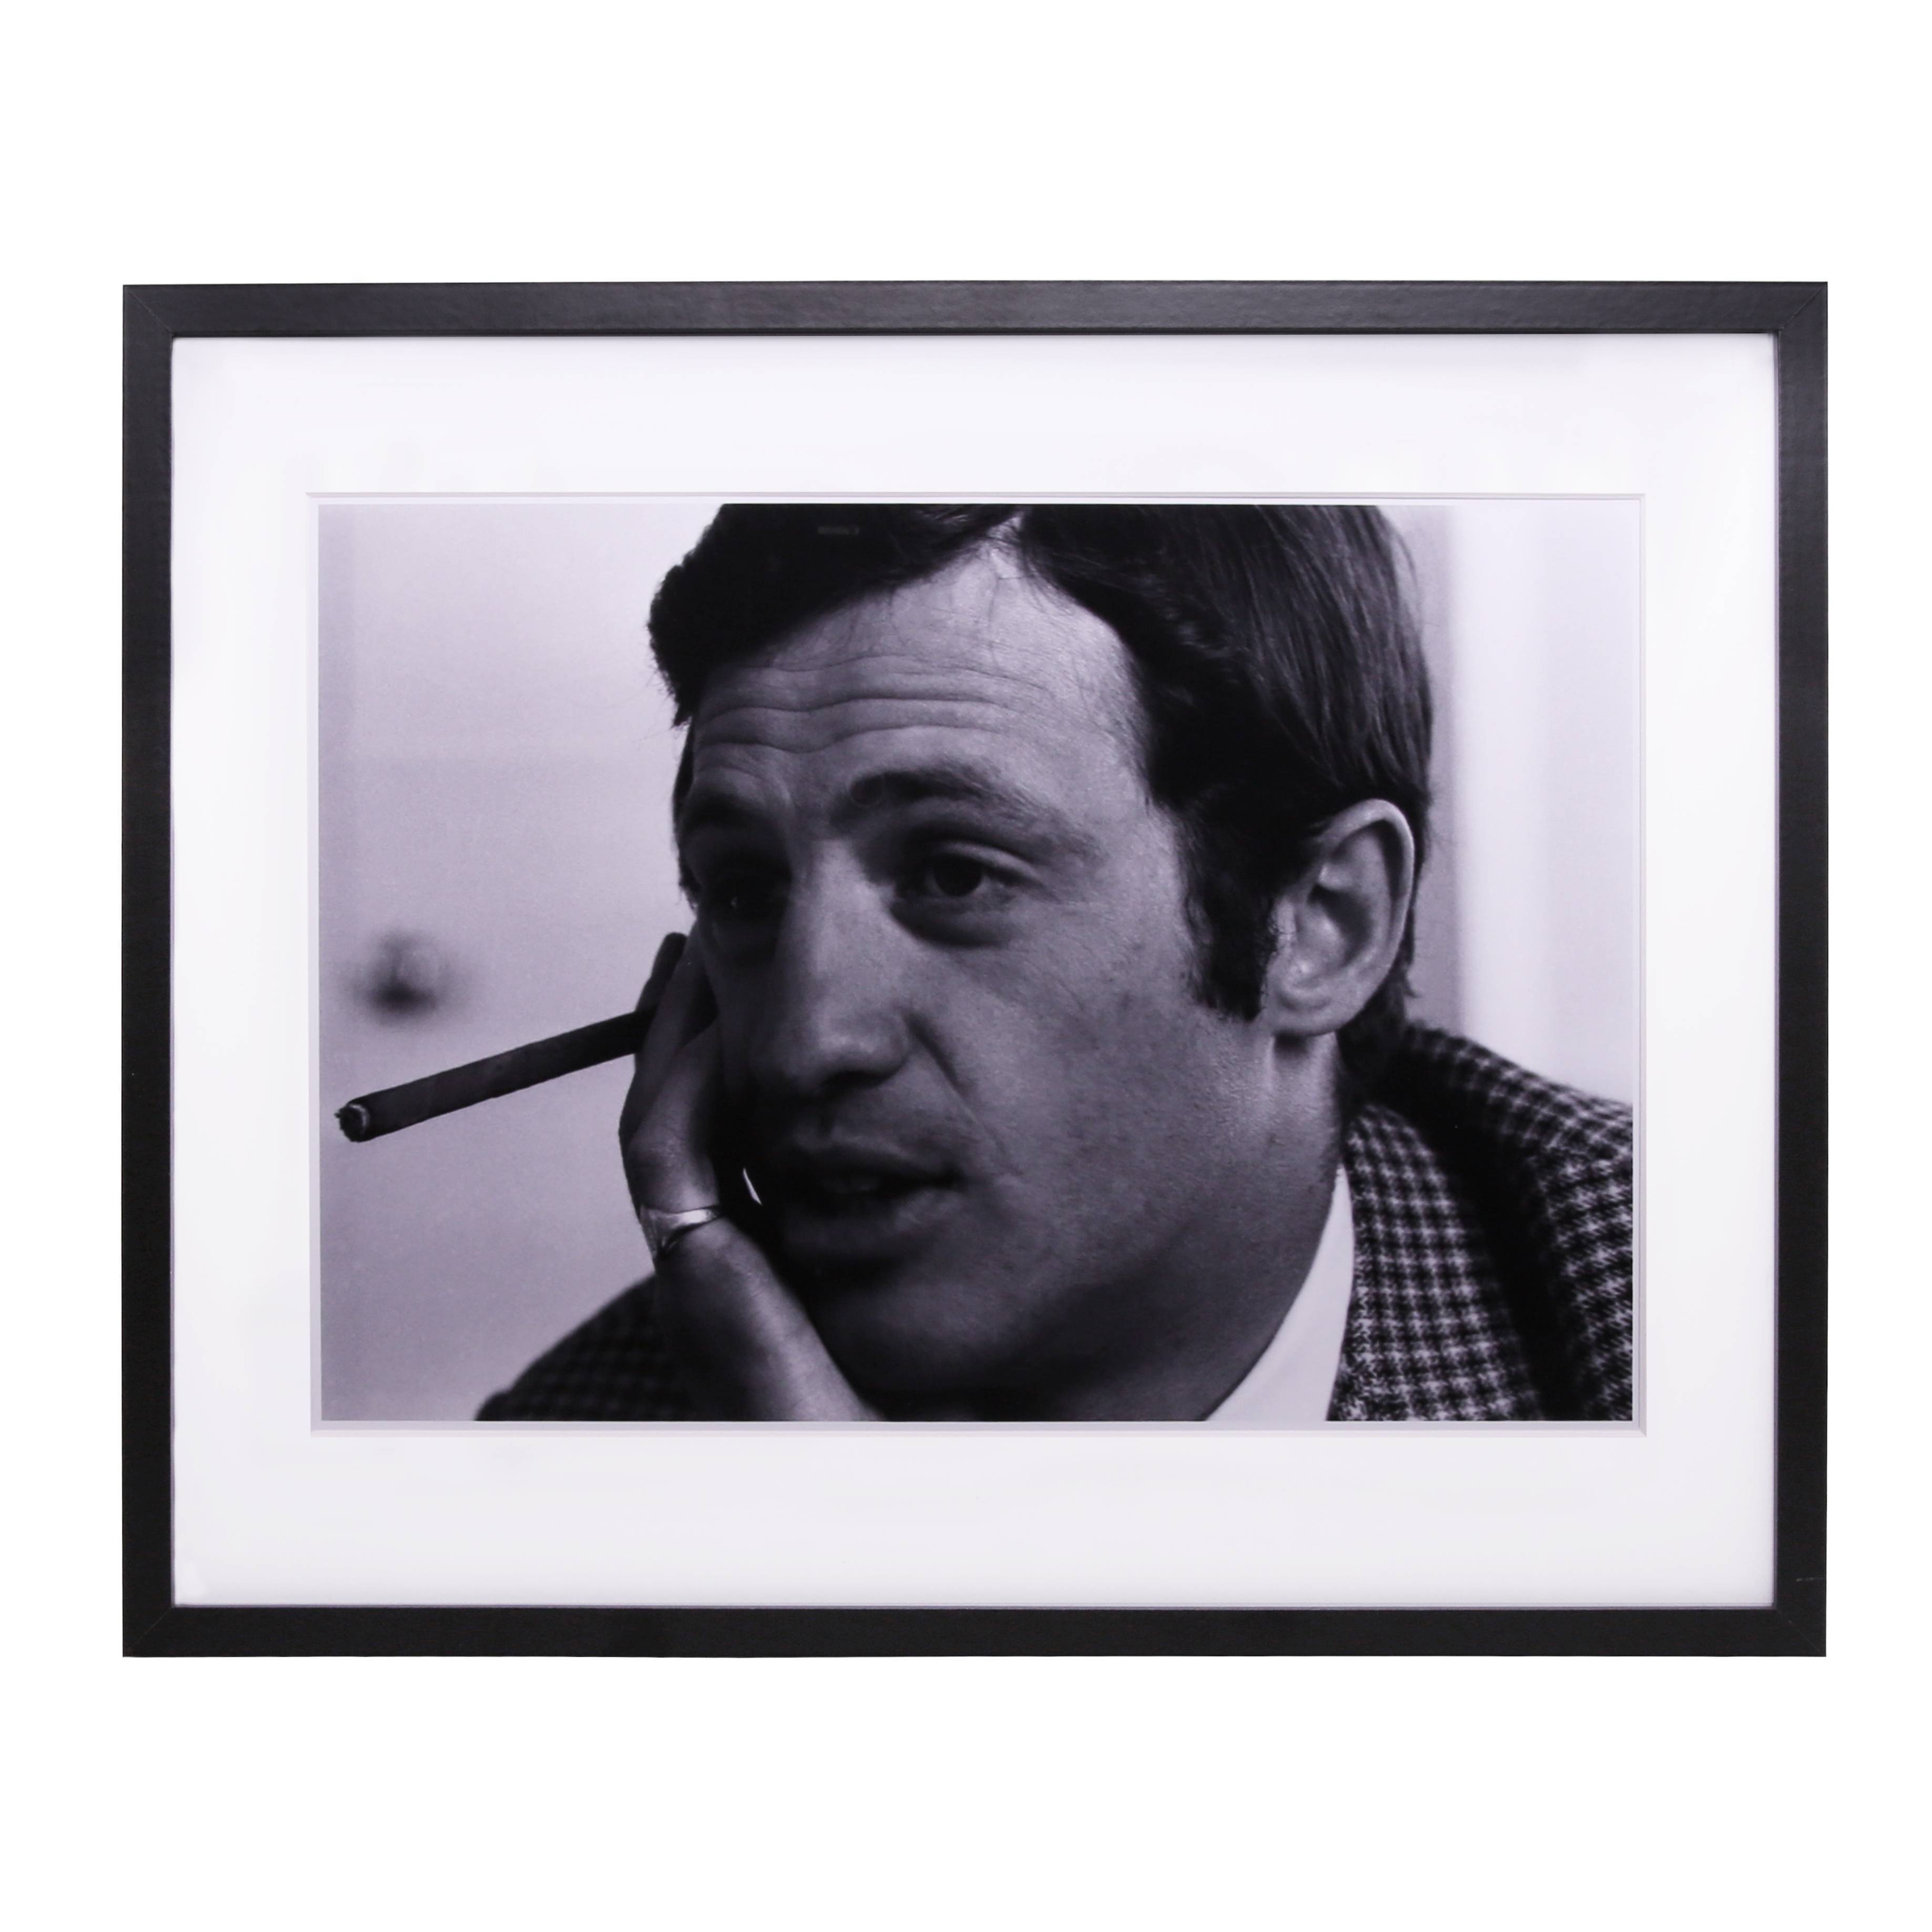 Henri Elwing, "Jean-Paul Belmondo", from the 1965's framed photograph, signed and numbered - 00pp